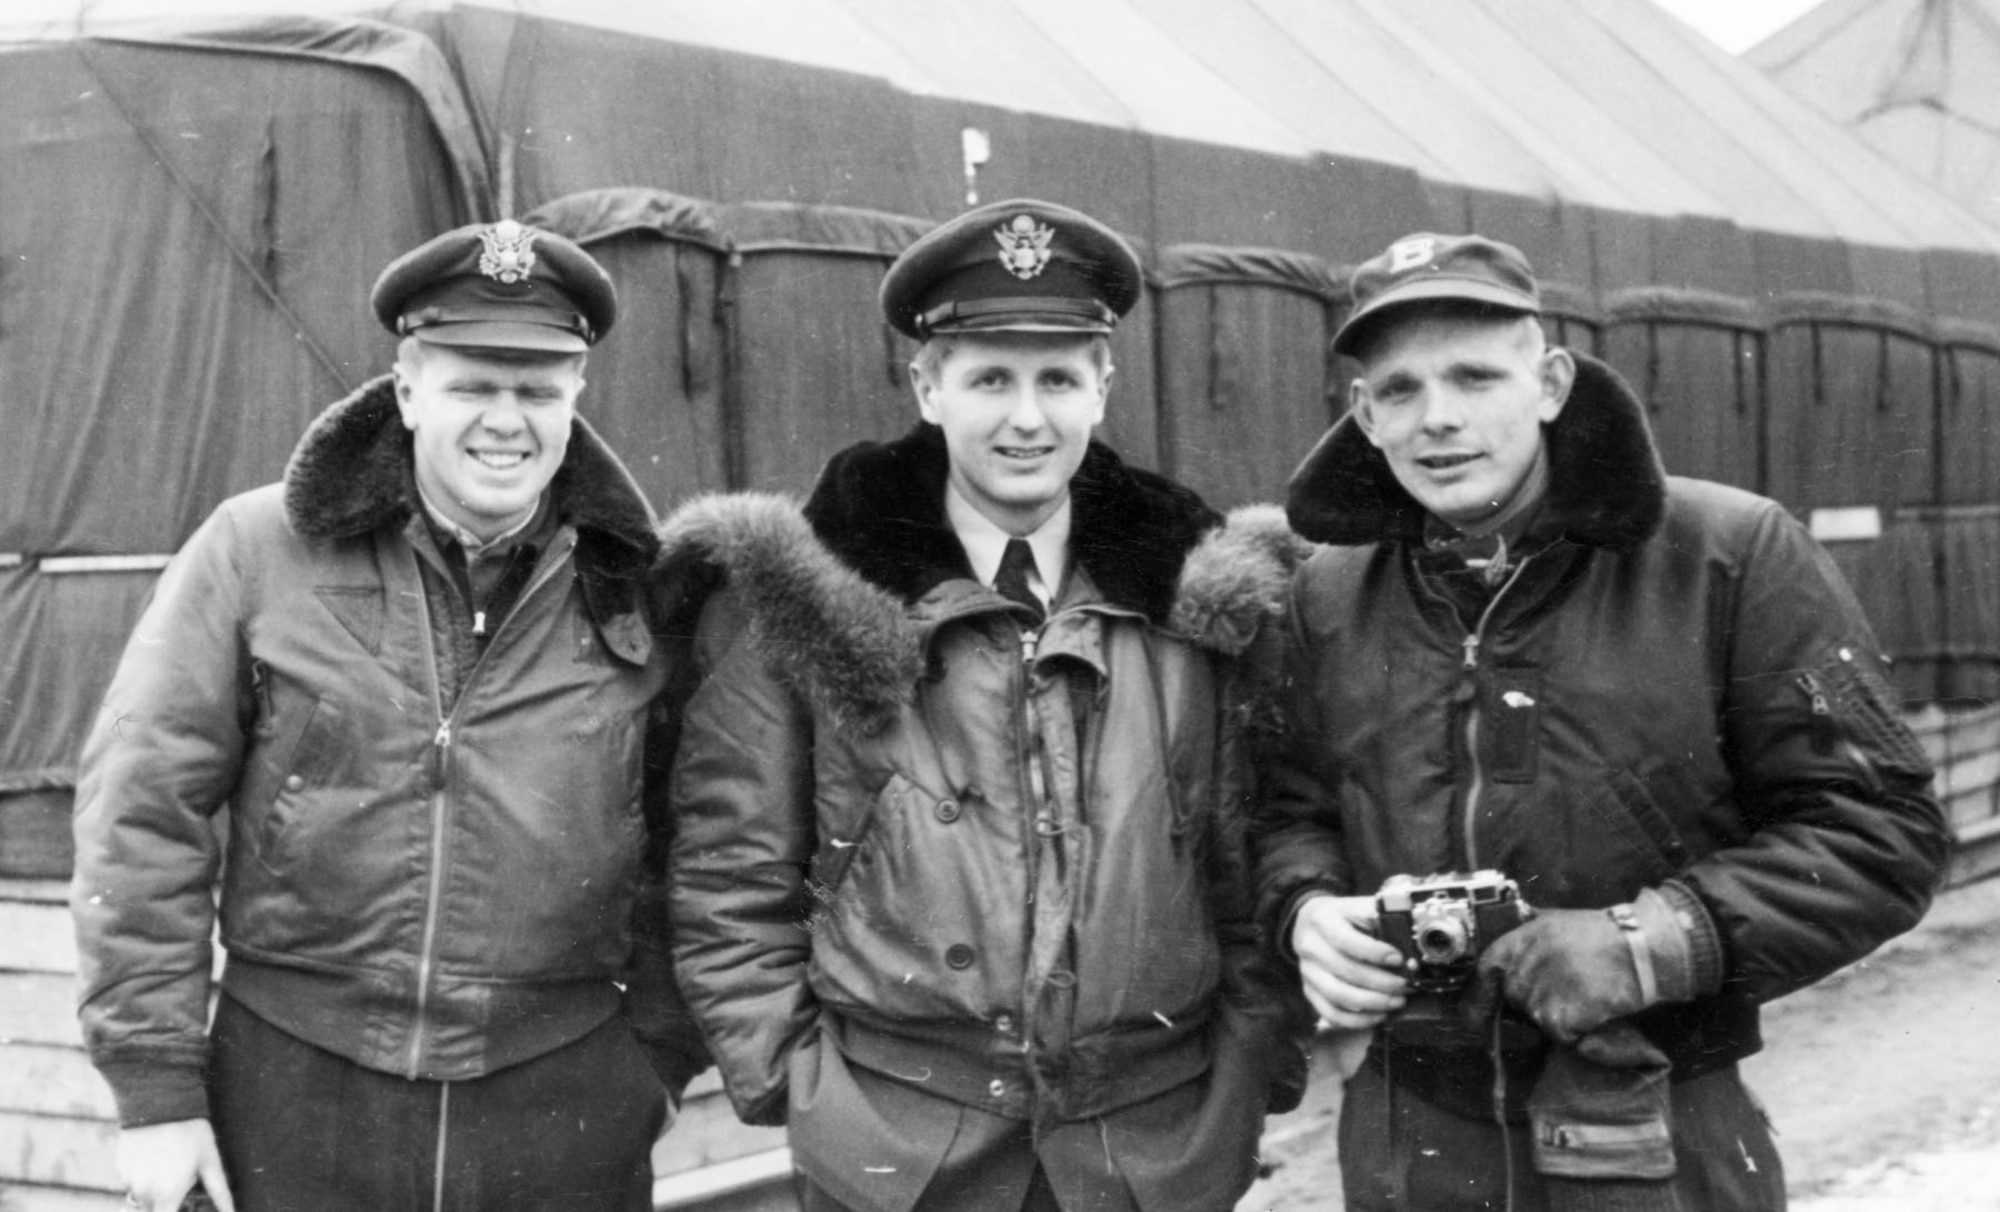 Capt. Iven C. Kincheloe Jr. (with camera) and two friends after arriving in Korea in 1951. (U.S. Air Force photo)